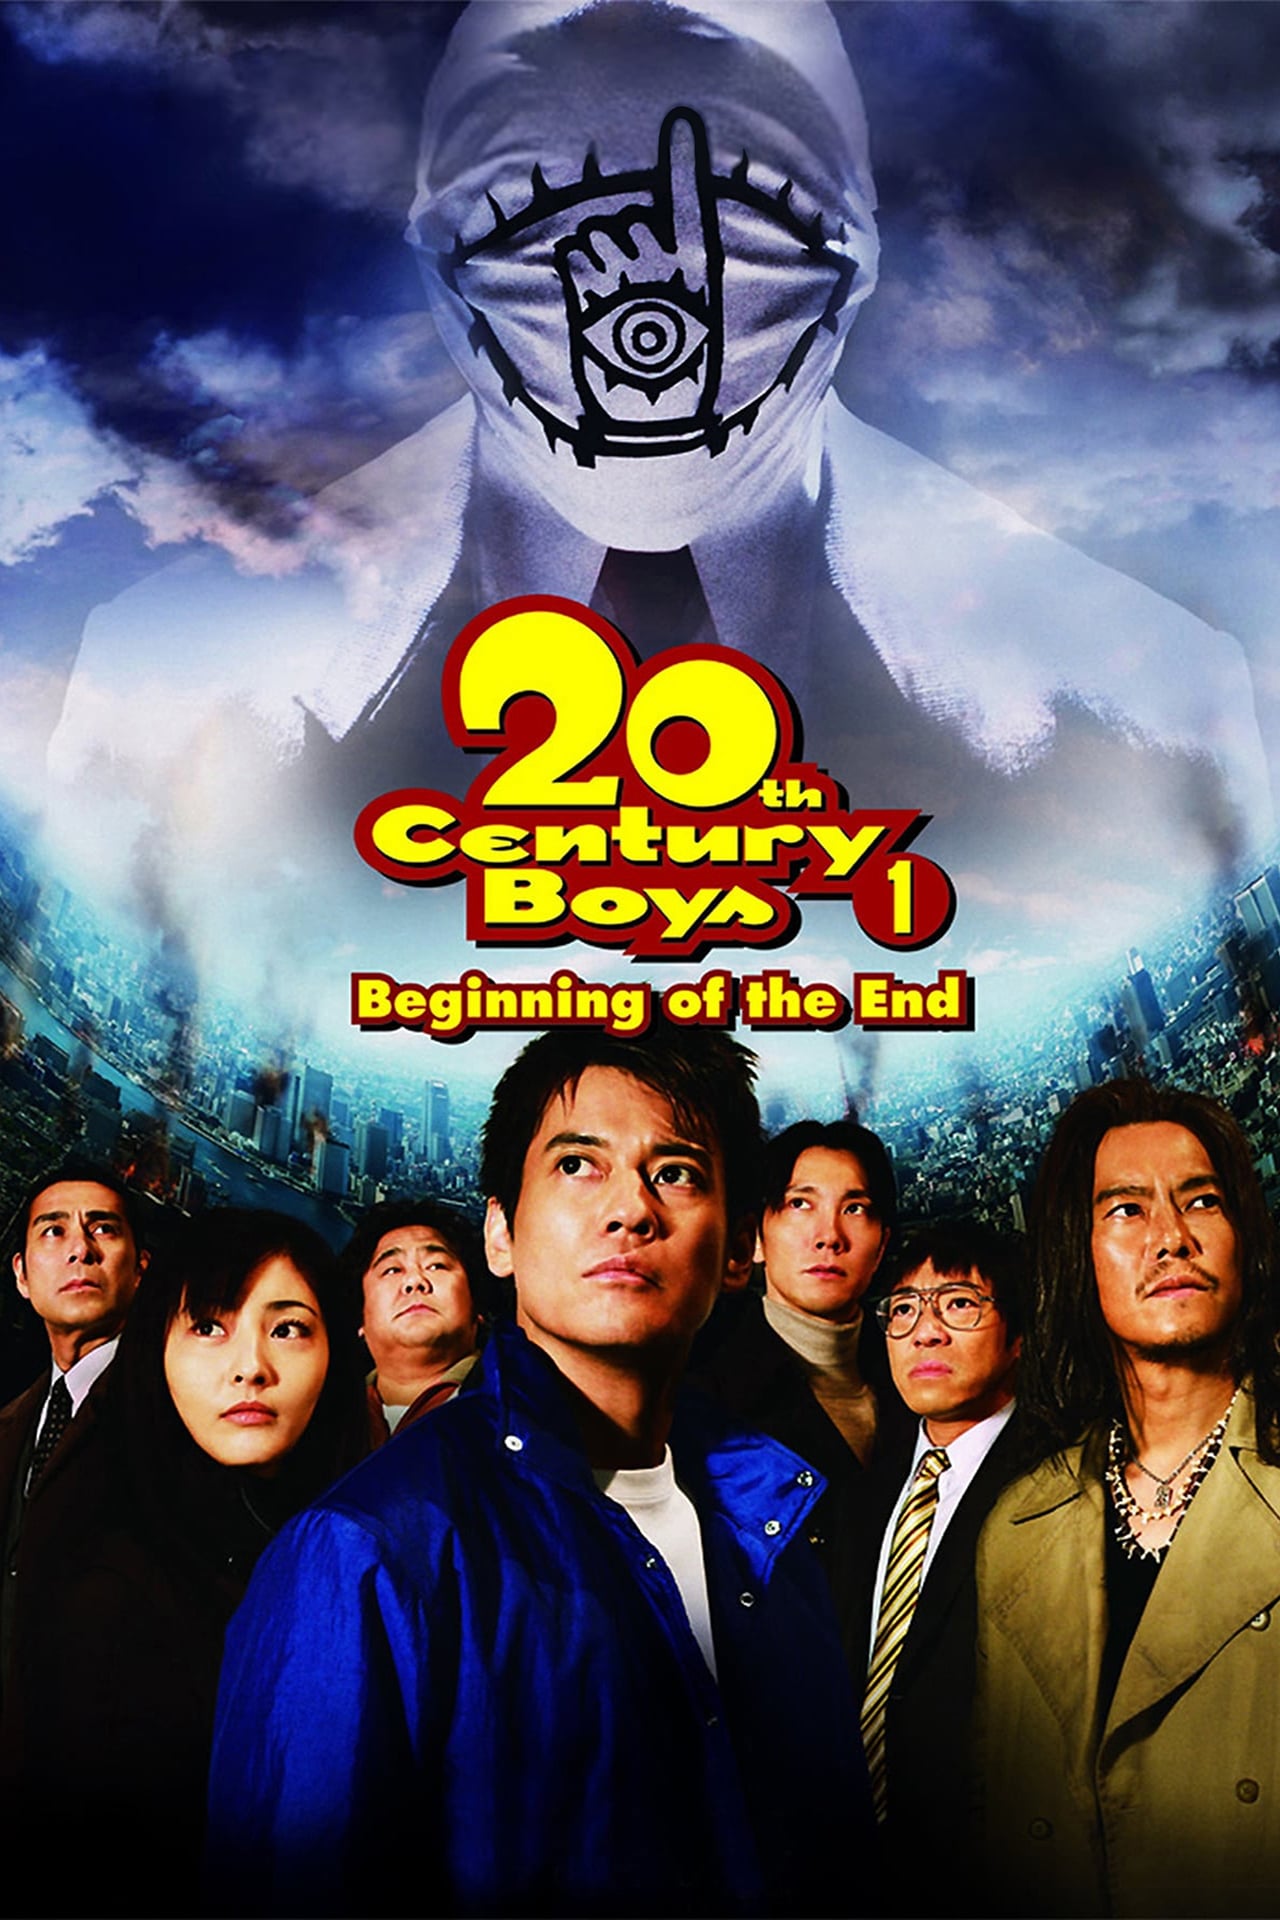 20th Century Boys - Chapter 1: Beginning of the End (2008)